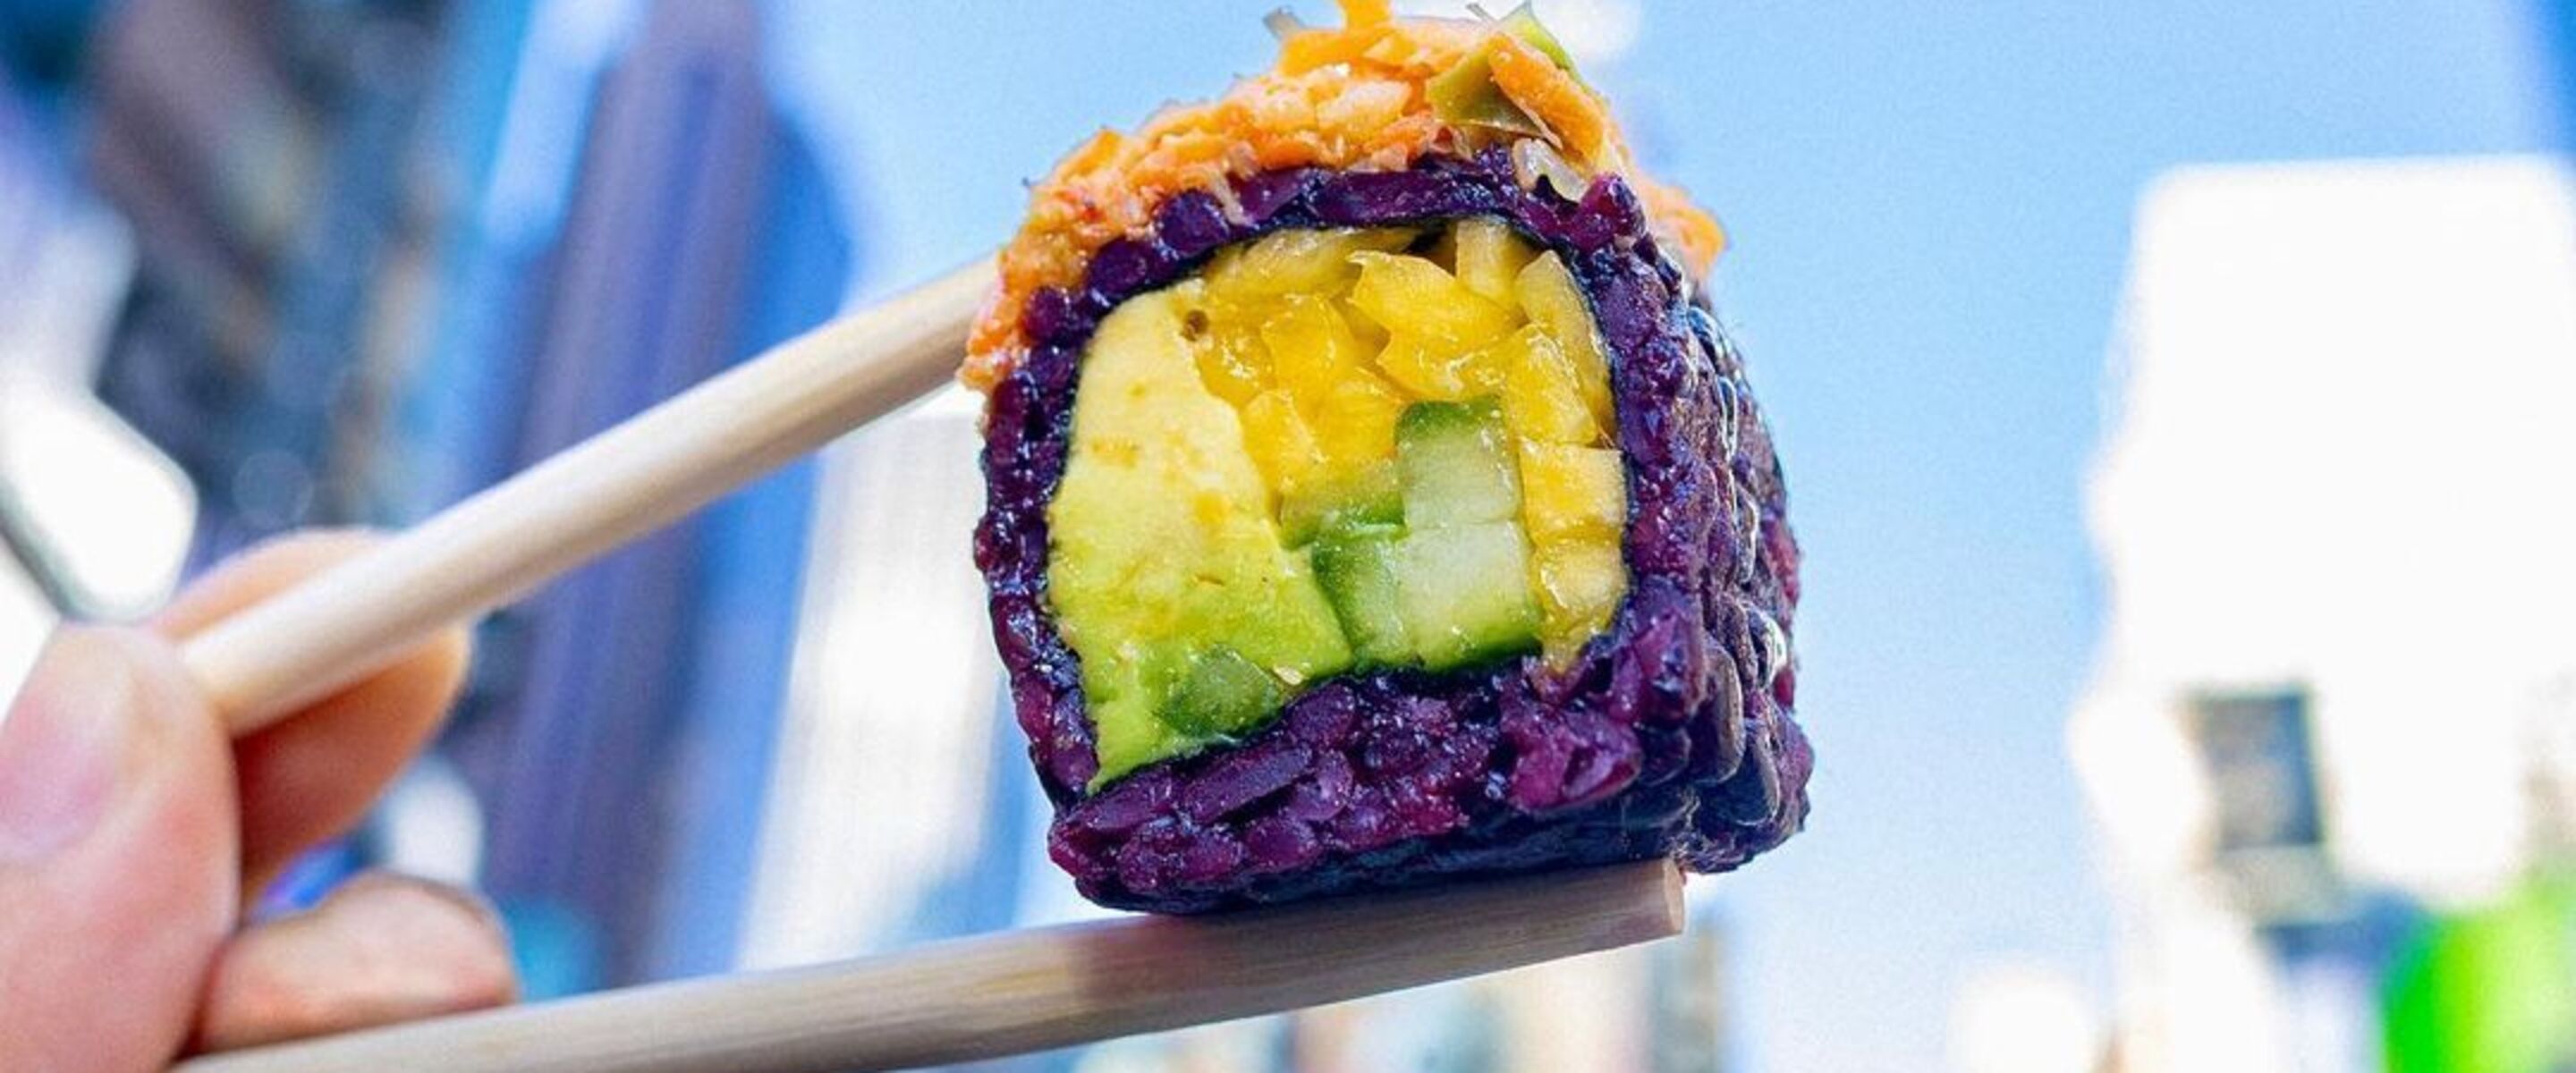 These 20 Restaurants in the US Serve Up Some of the Best Sushi—Hold the Fish